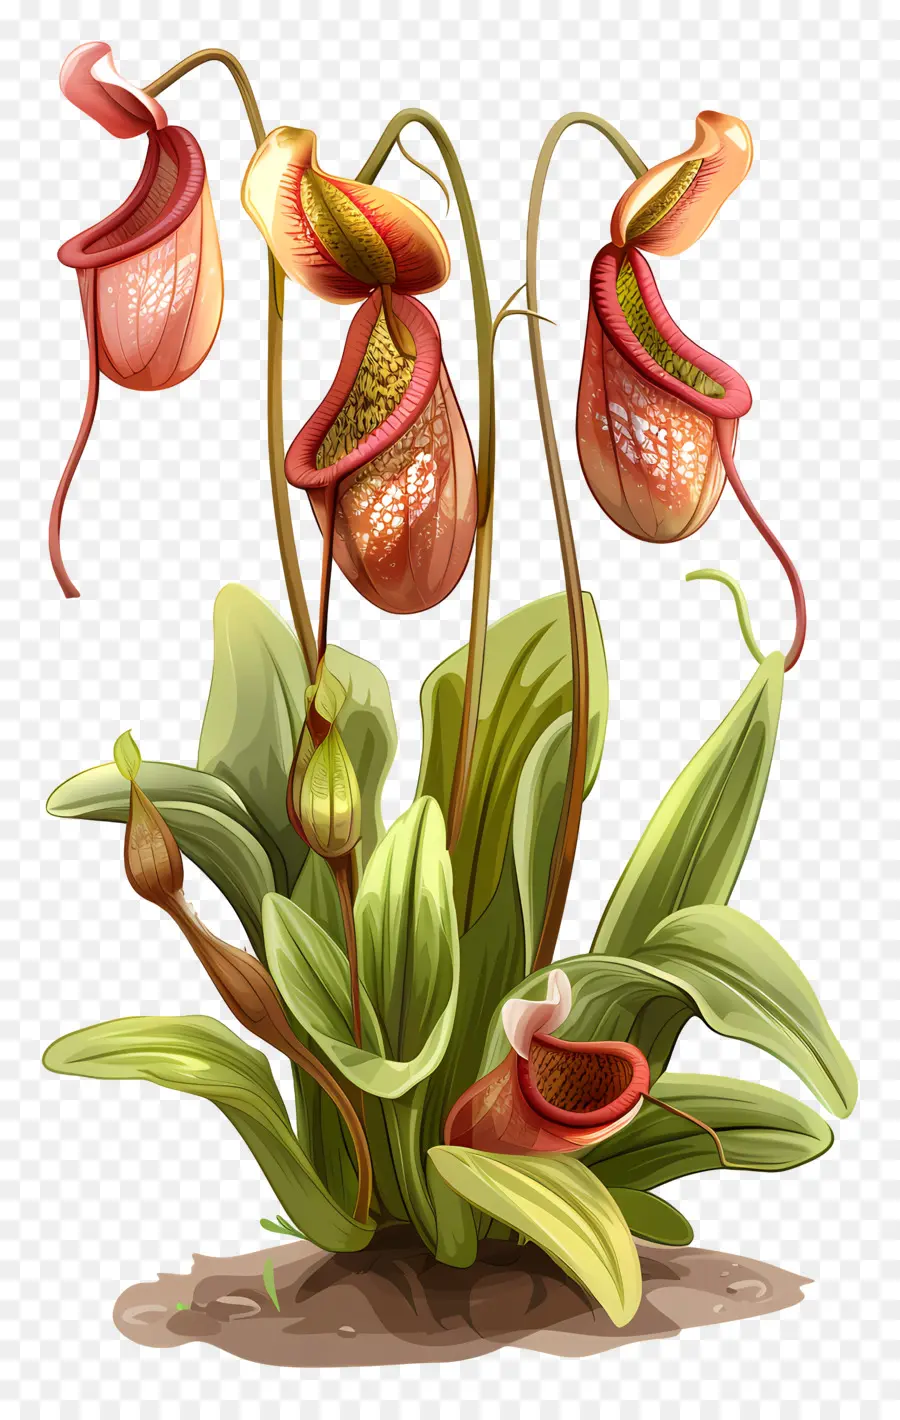 tropical pitcher plant cobra lily carnivorous plant pitcher plant hooded leaves